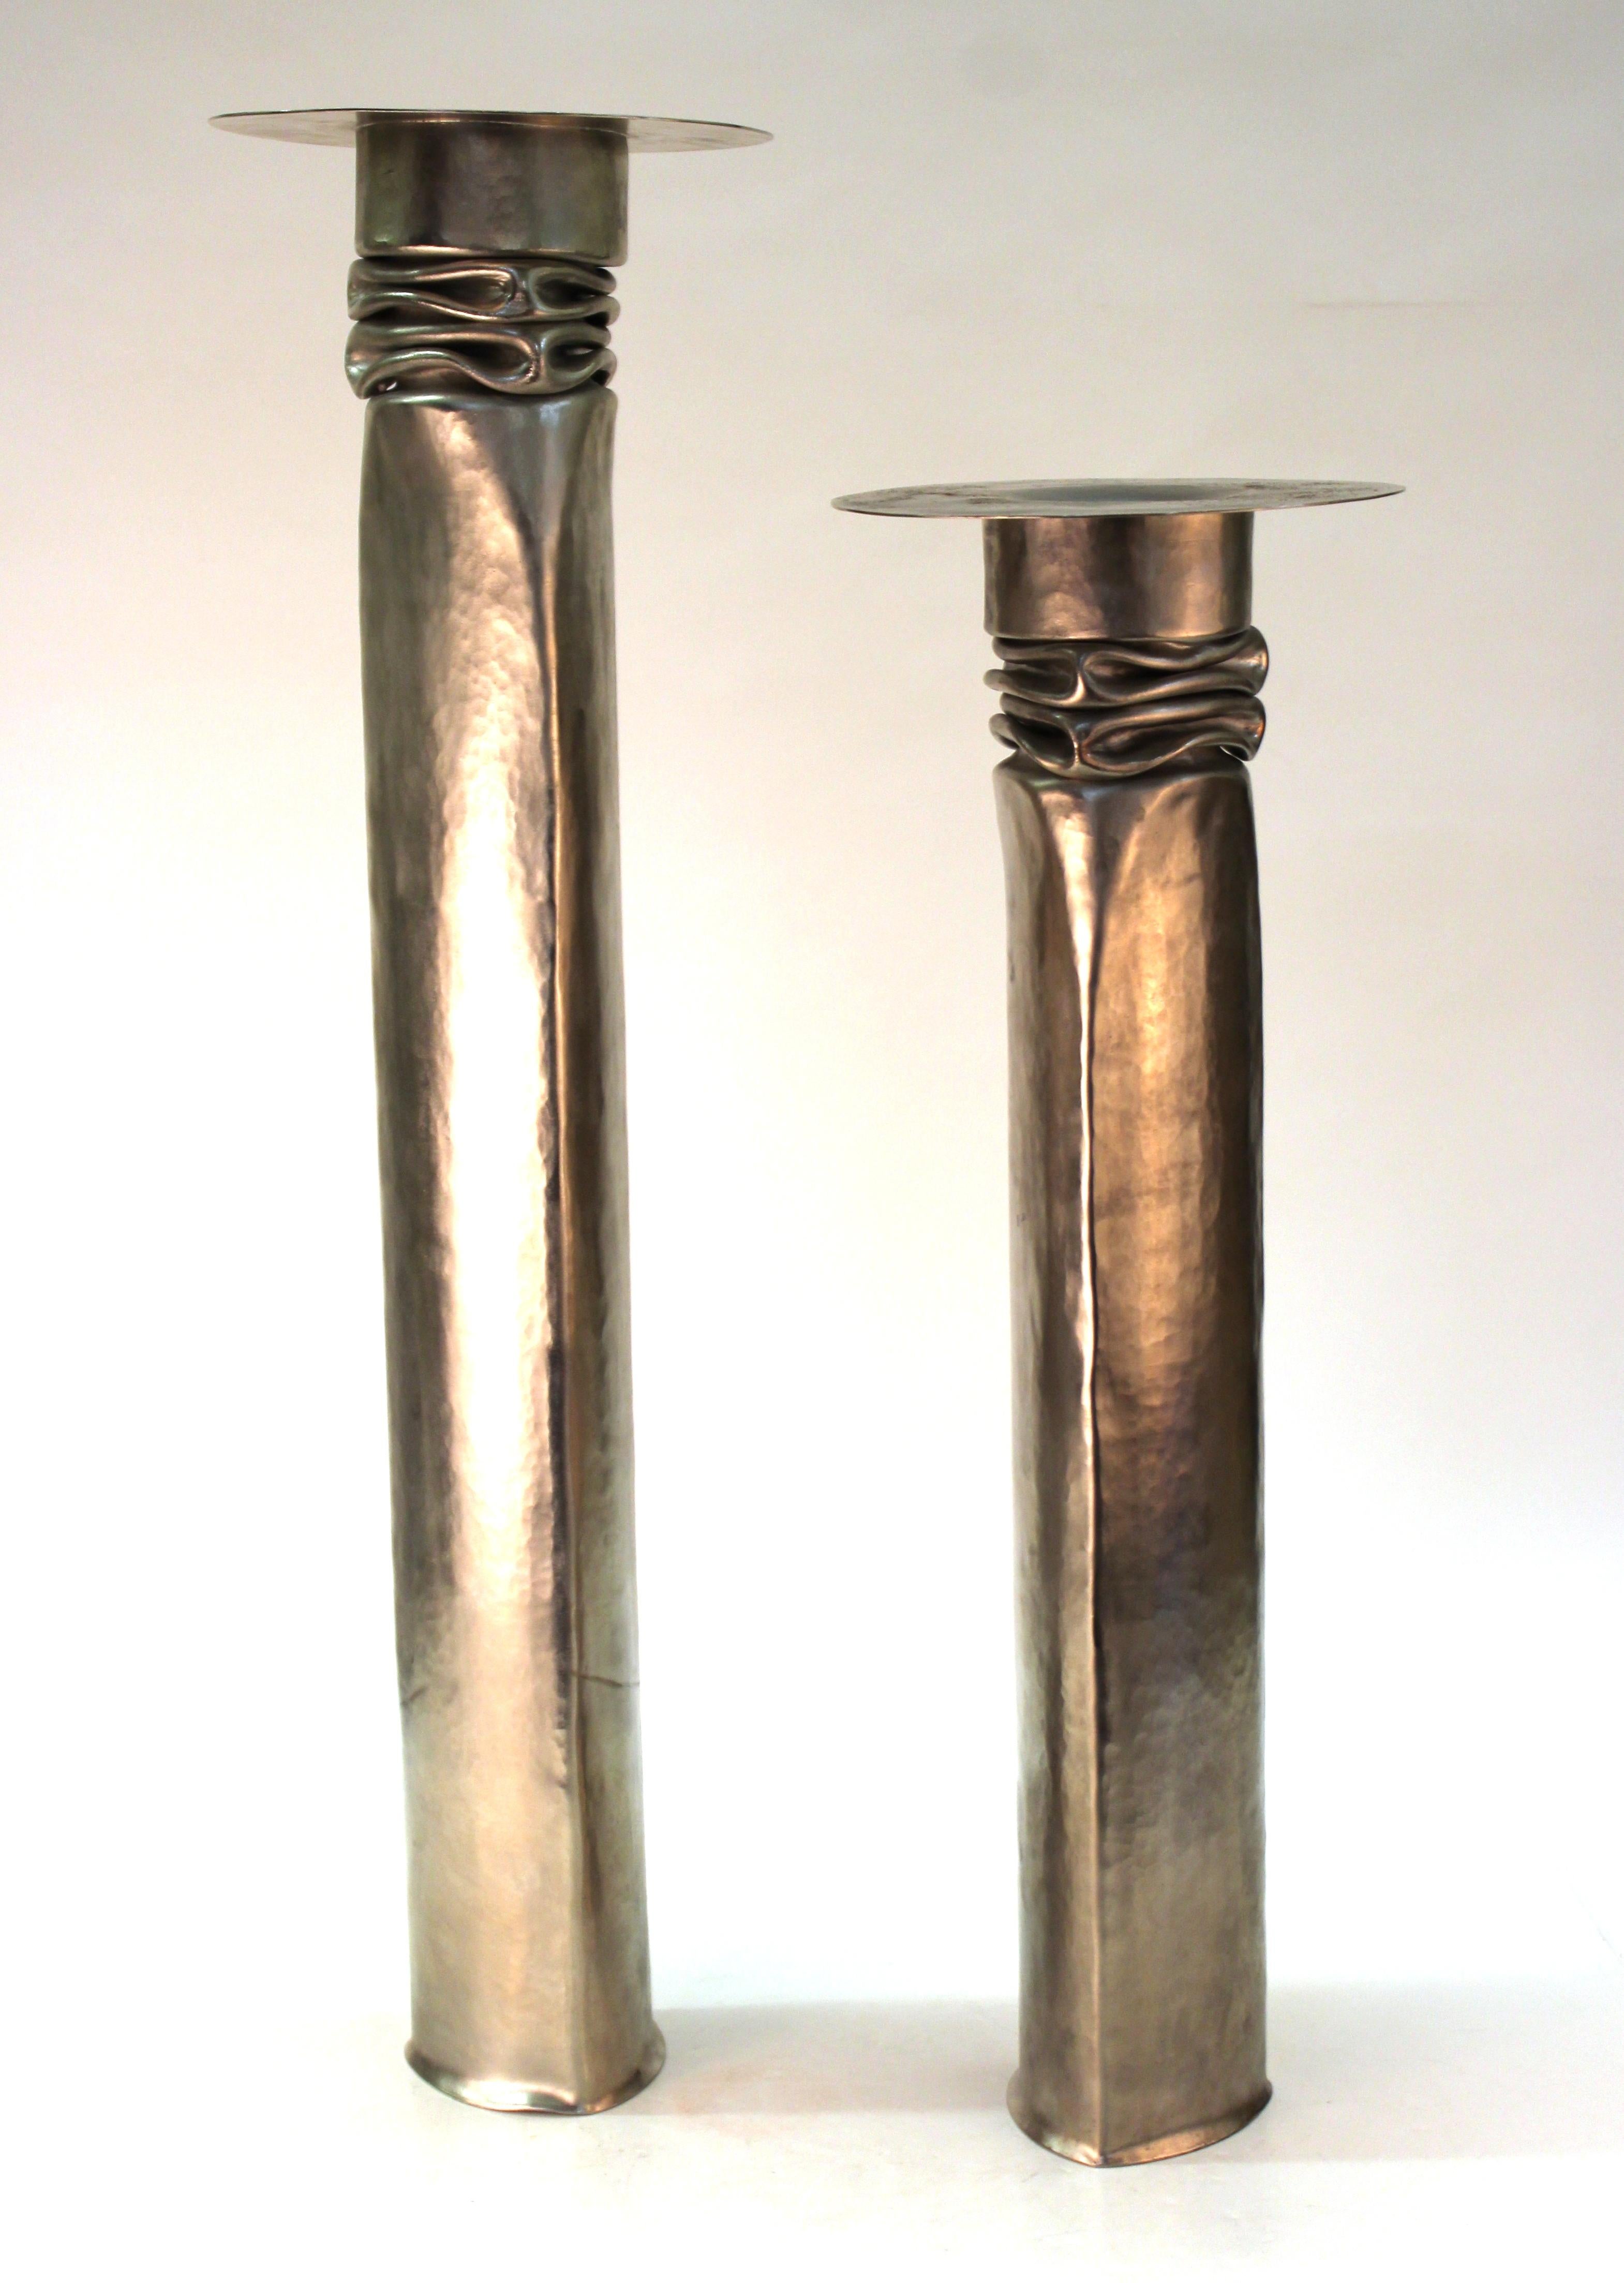 American Modernist pair of handcrafted metal candleholders in nickeled copper, created by famed metal-smith Thomas Roy Markusen in the late 1970s in the United States. The pair has makers marks on the bottom and is in remarkable vintage condition.